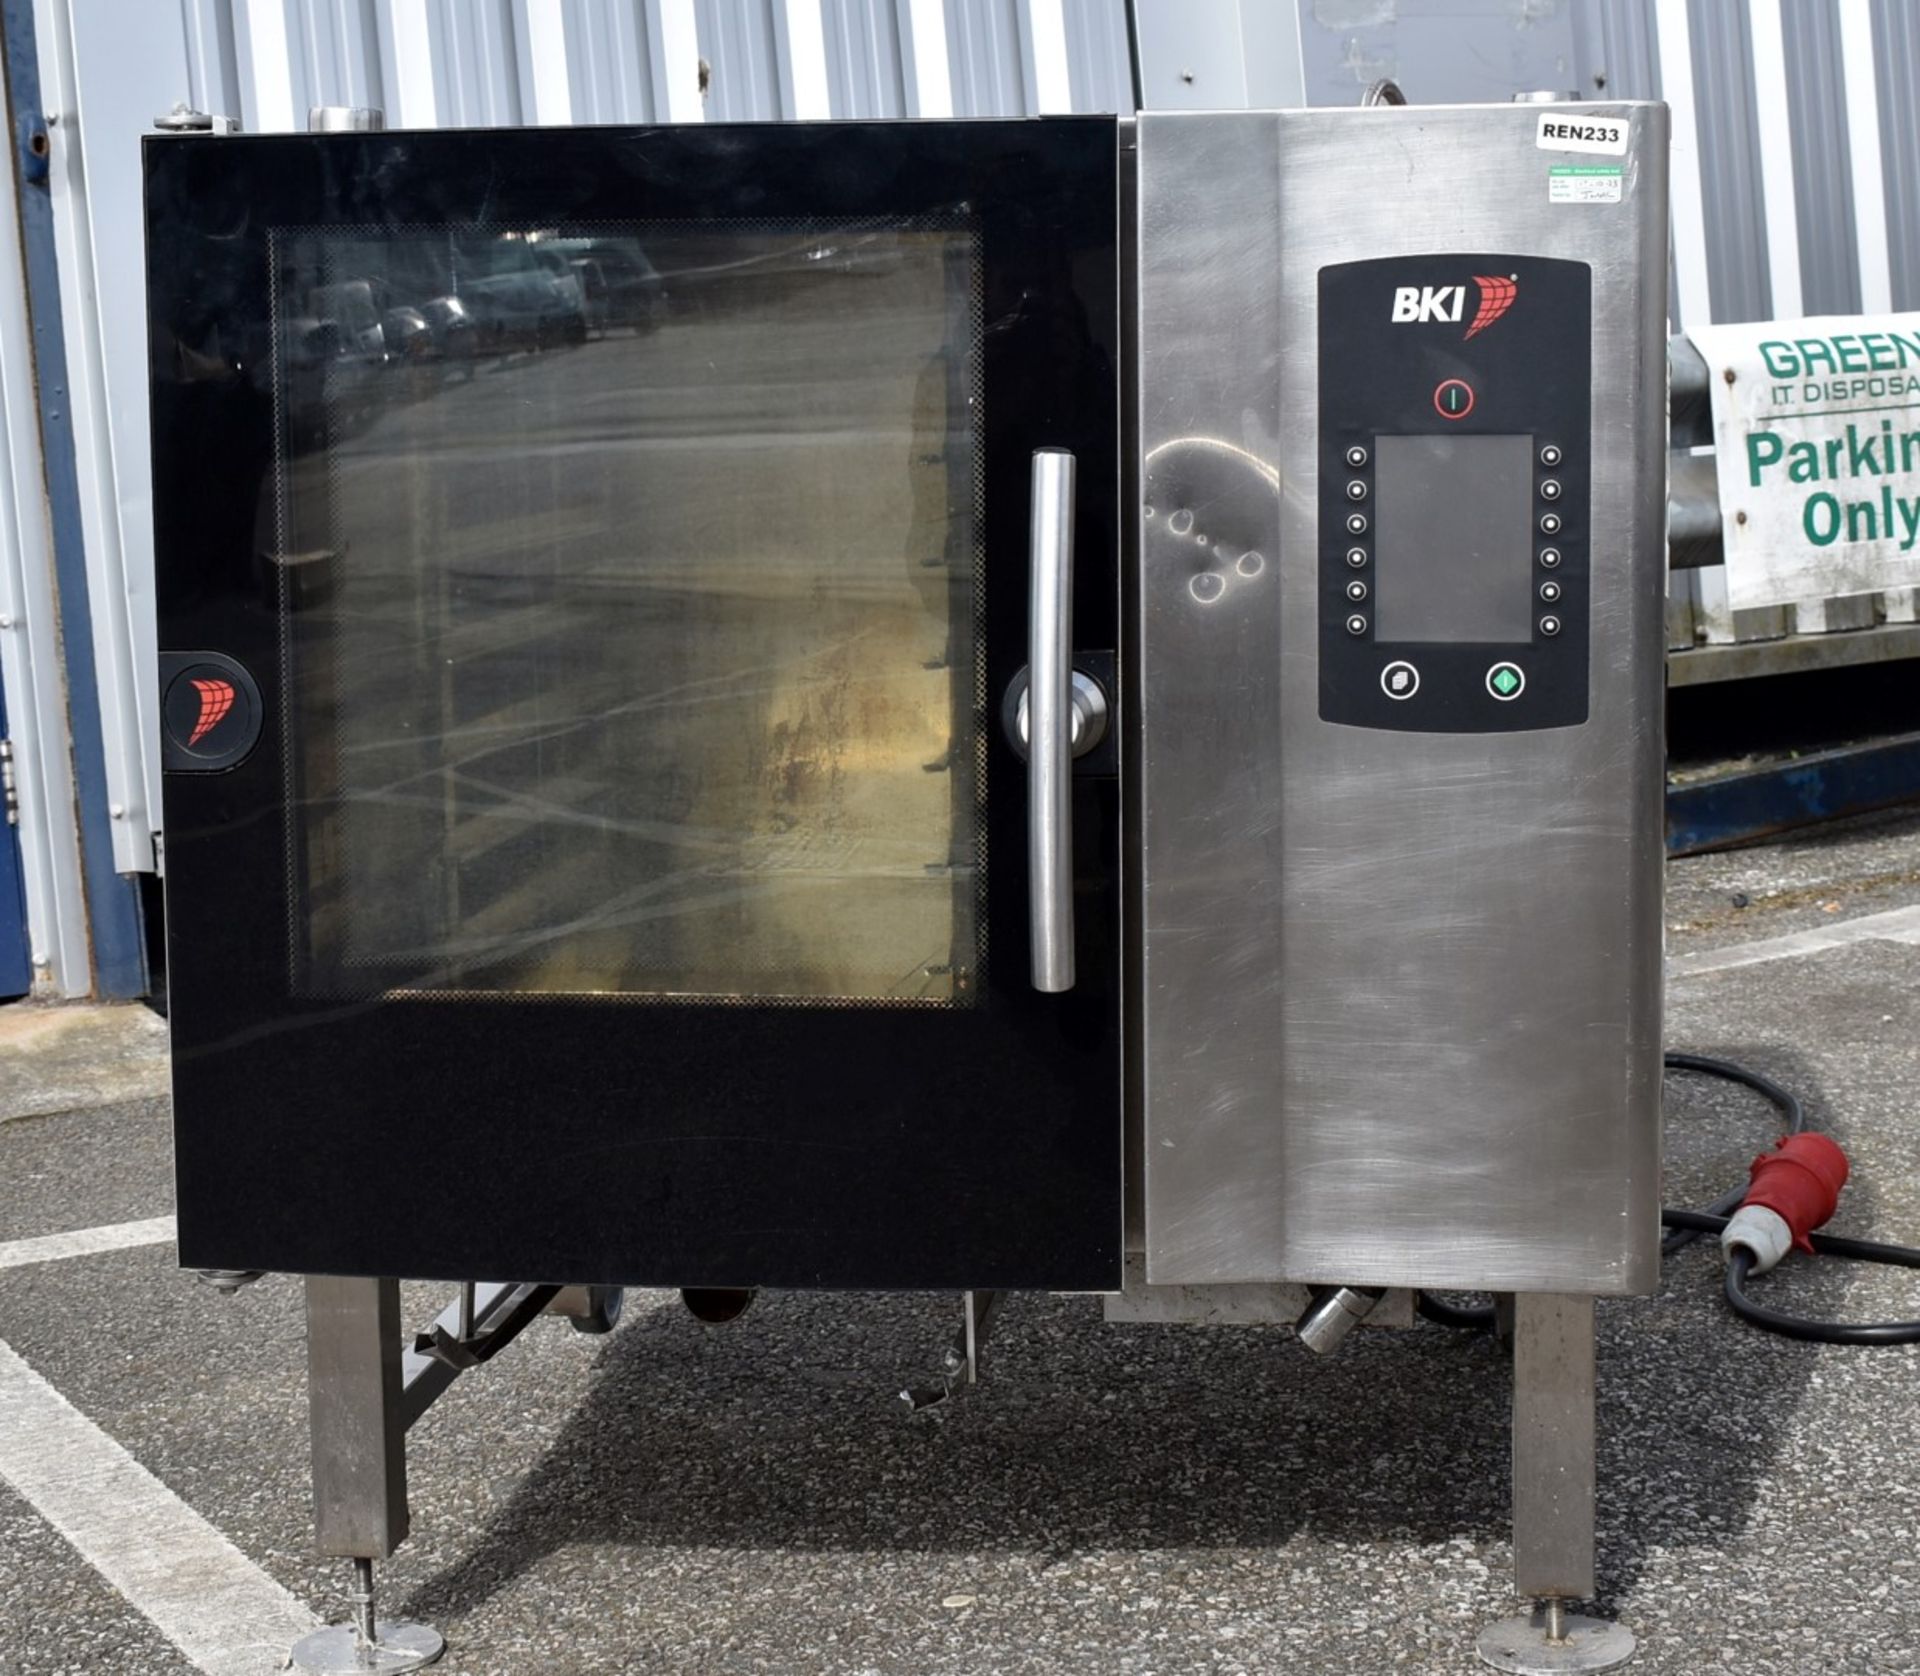 1 x Houno CPE 1.06 Electric Combi Oven - 3 Phase Combi Oven With Various Pre-Set Cooking Options - Image 5 of 10